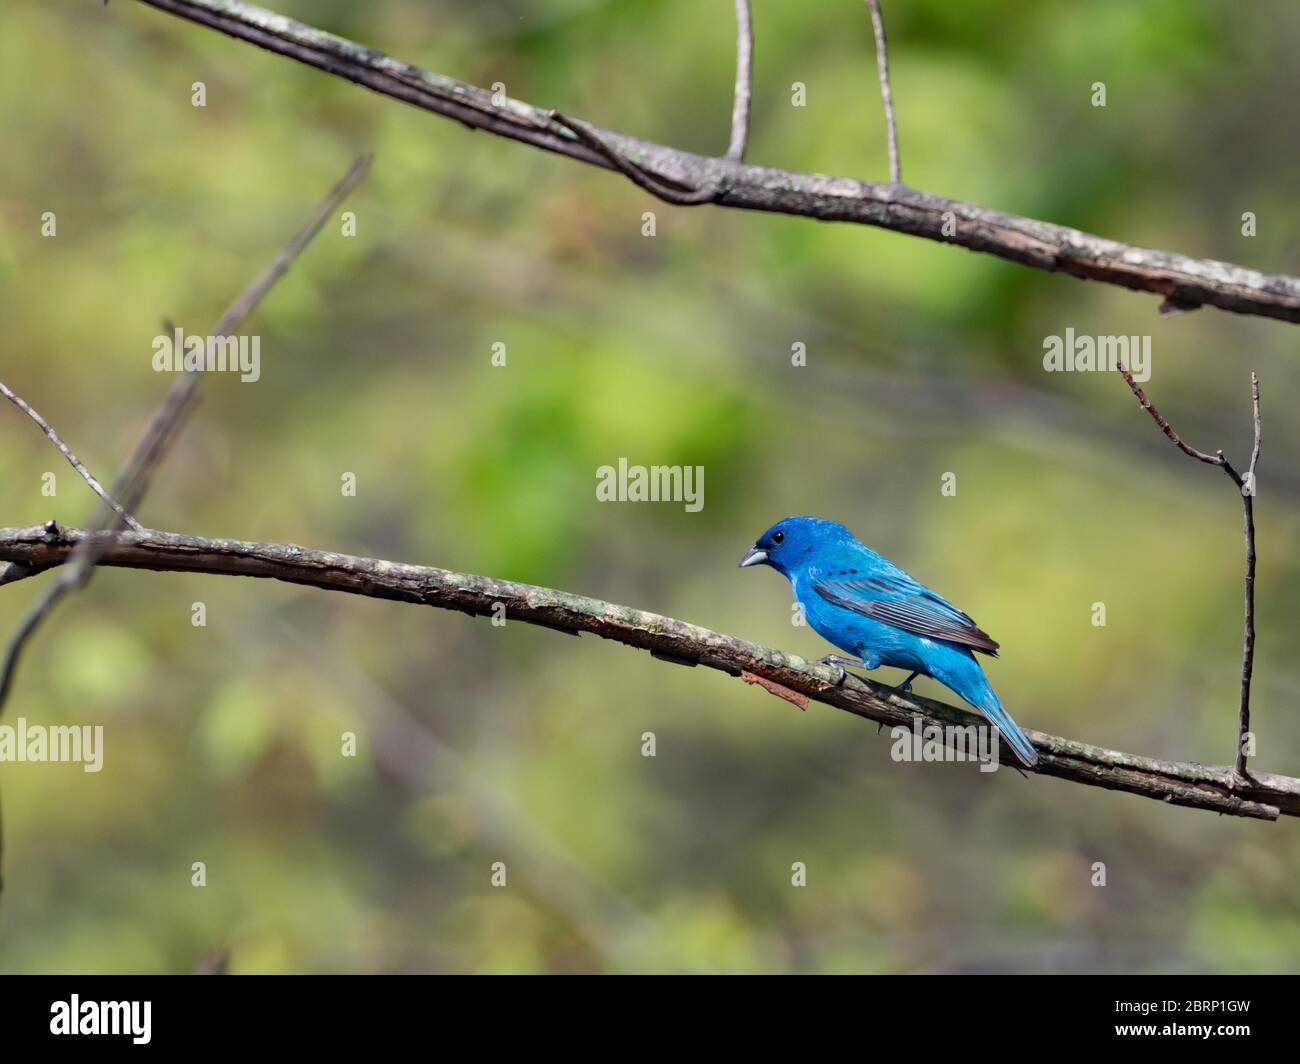 Indigo bunting, Passerina cyanea, one of the most stunningly colored birds in north america Stock Photo